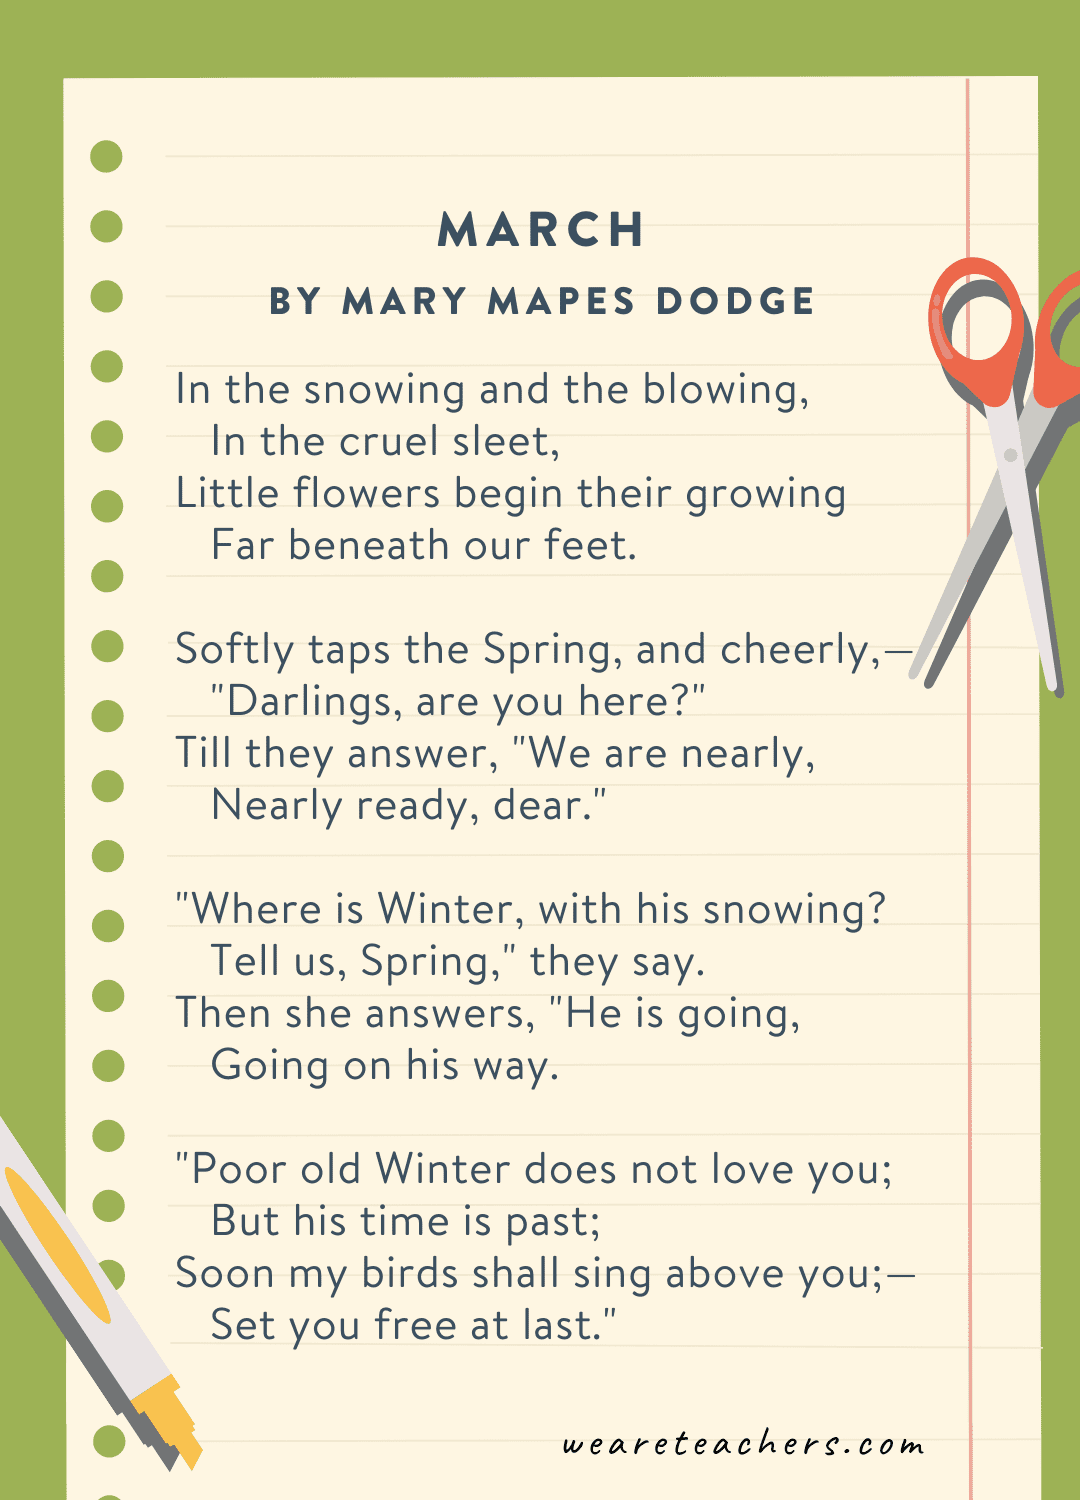 March by Mary Mapes Dodge